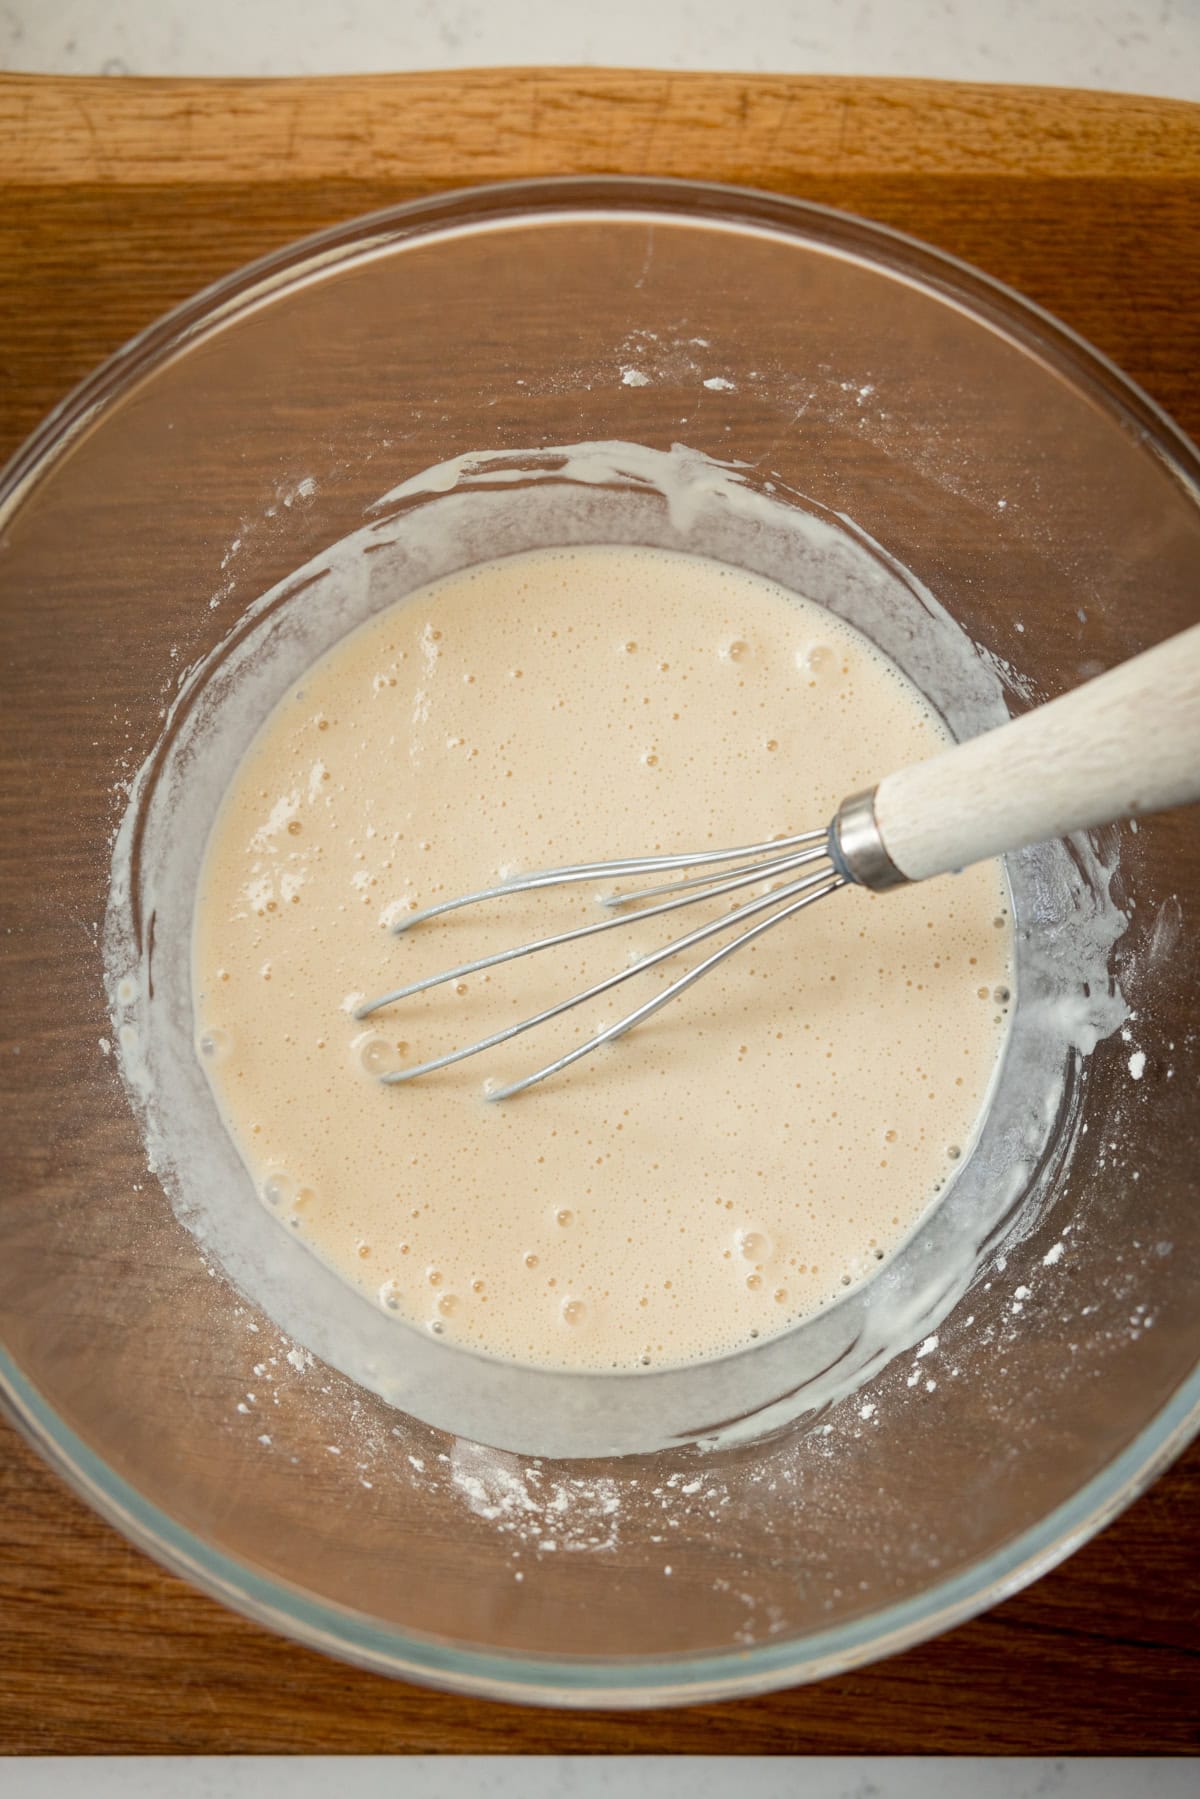 A tall, overhead shot of the finished beer batter. The batter is in a clear, glass bowl with a whisk wooden handle in the batter. All this is laid on a wooden board.